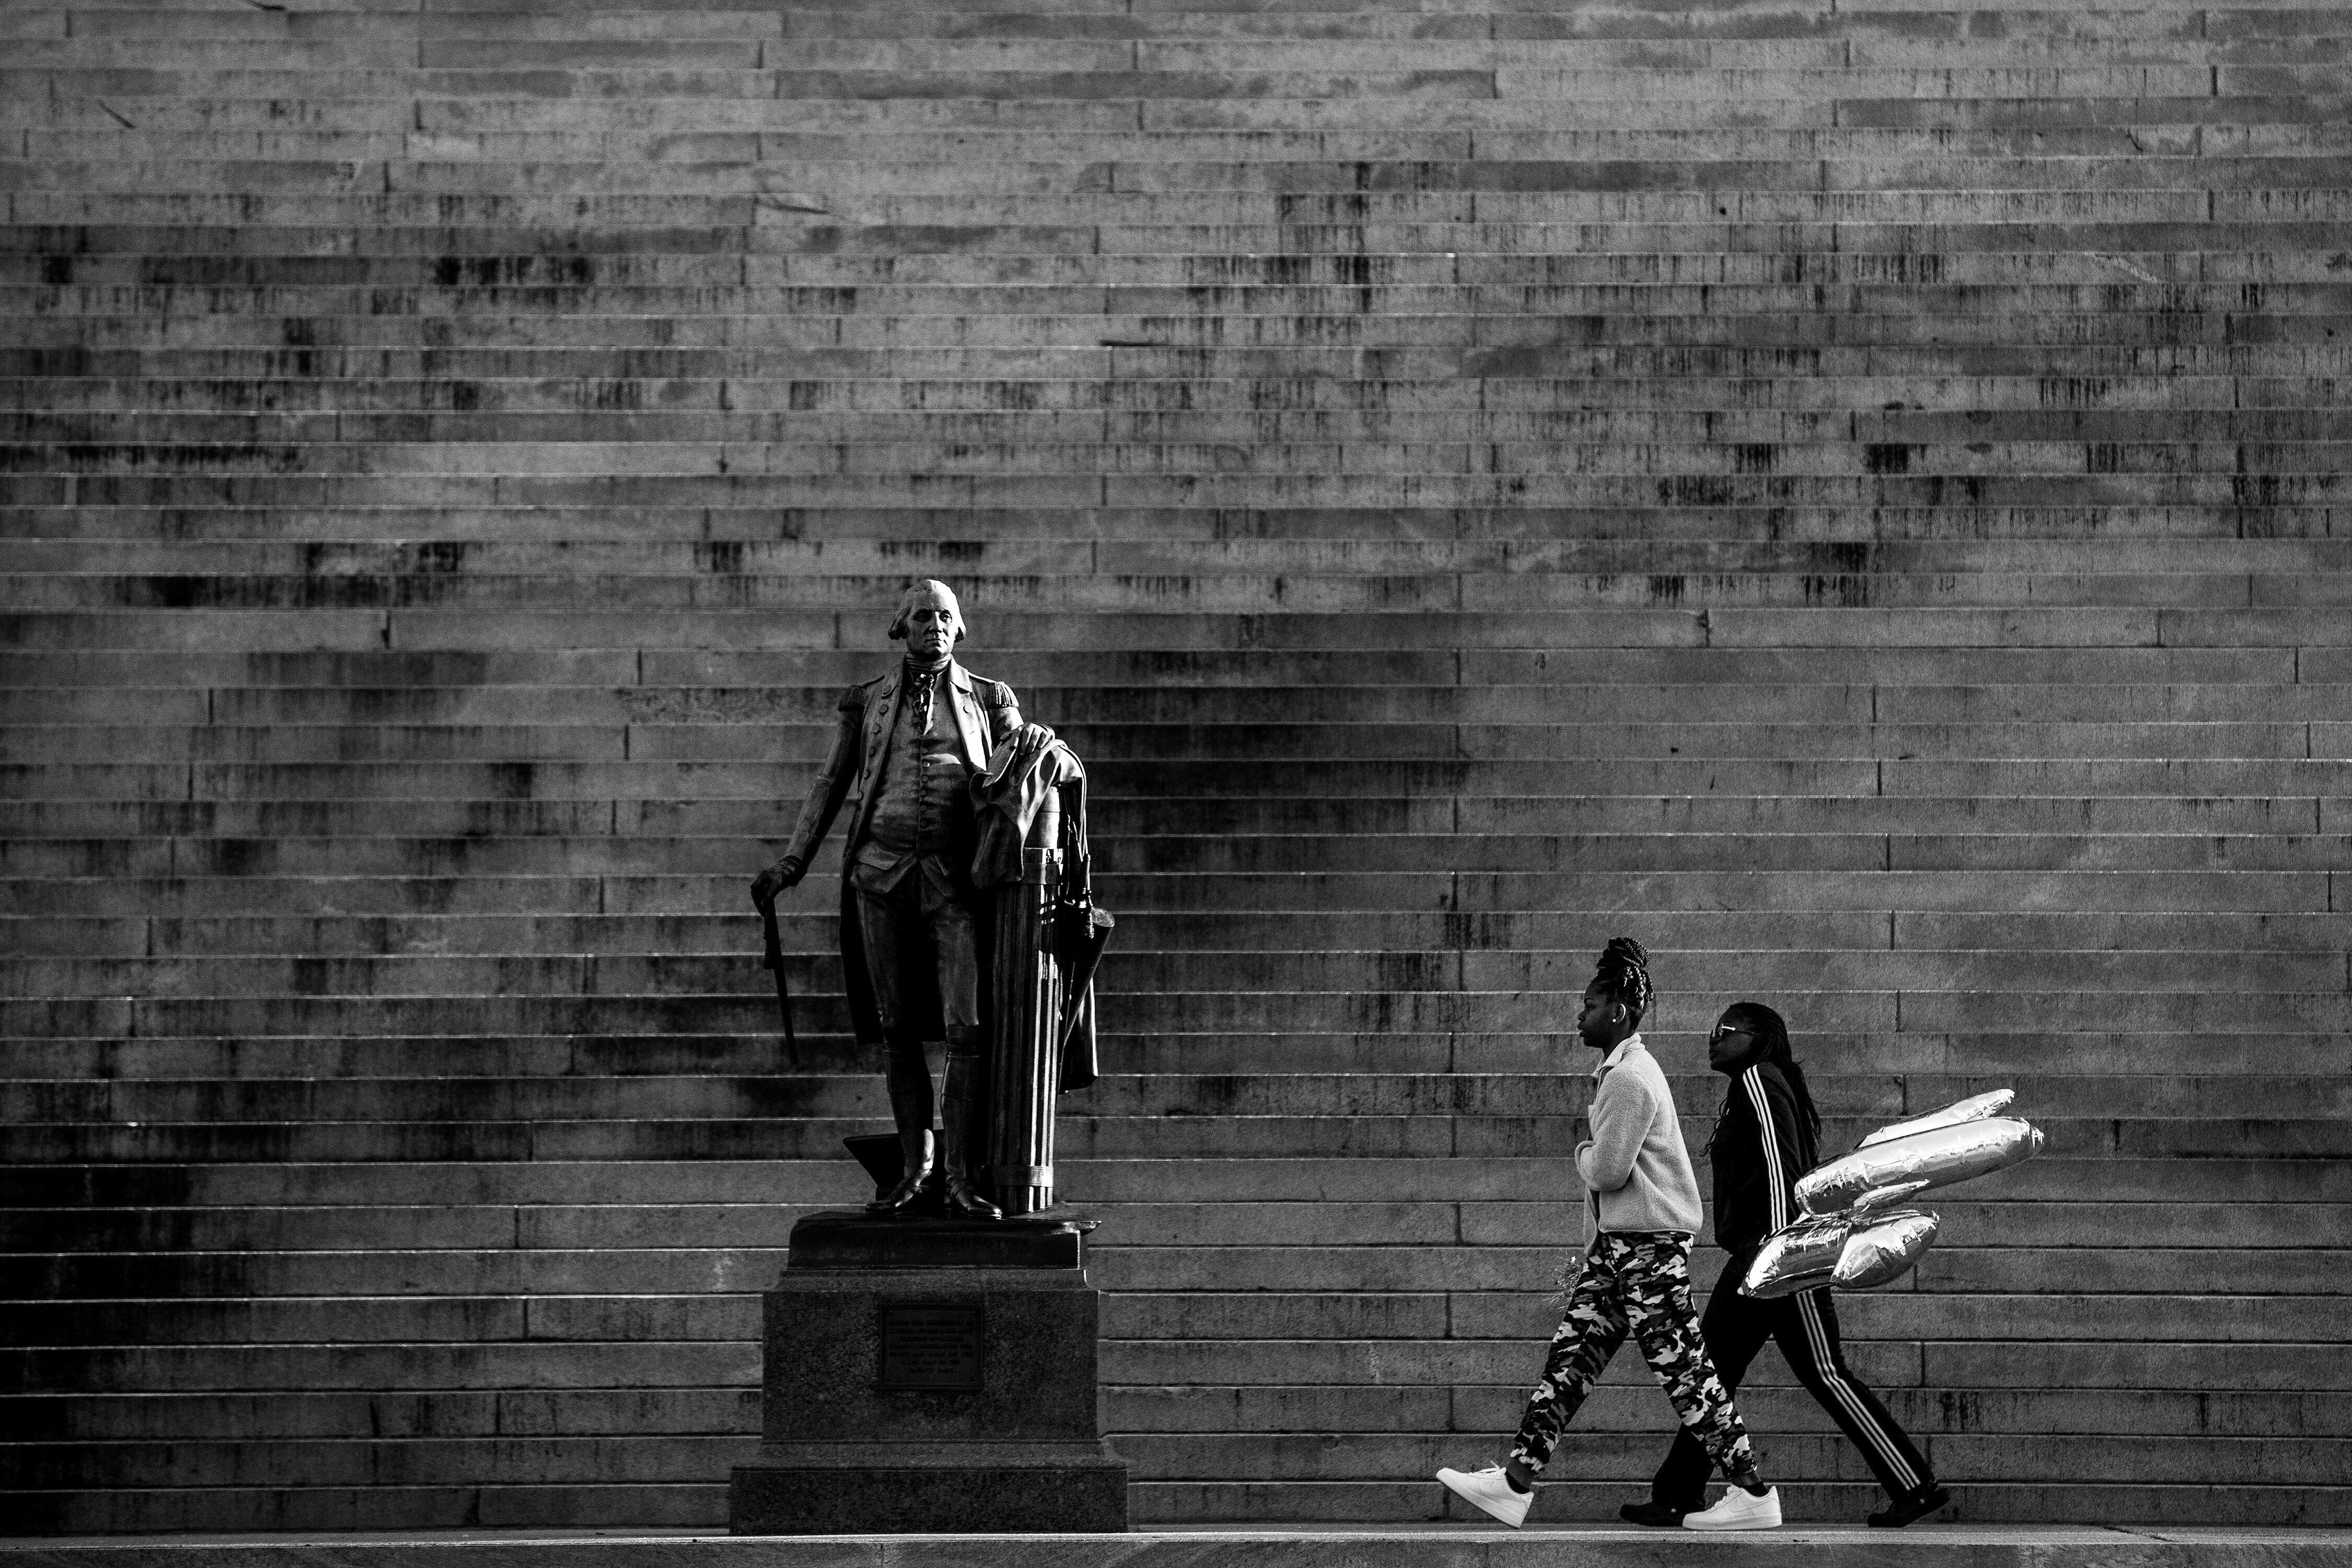 The statue of George Washington on the steps of the South Carolina Statehouse in Columbia, South Carolina. 